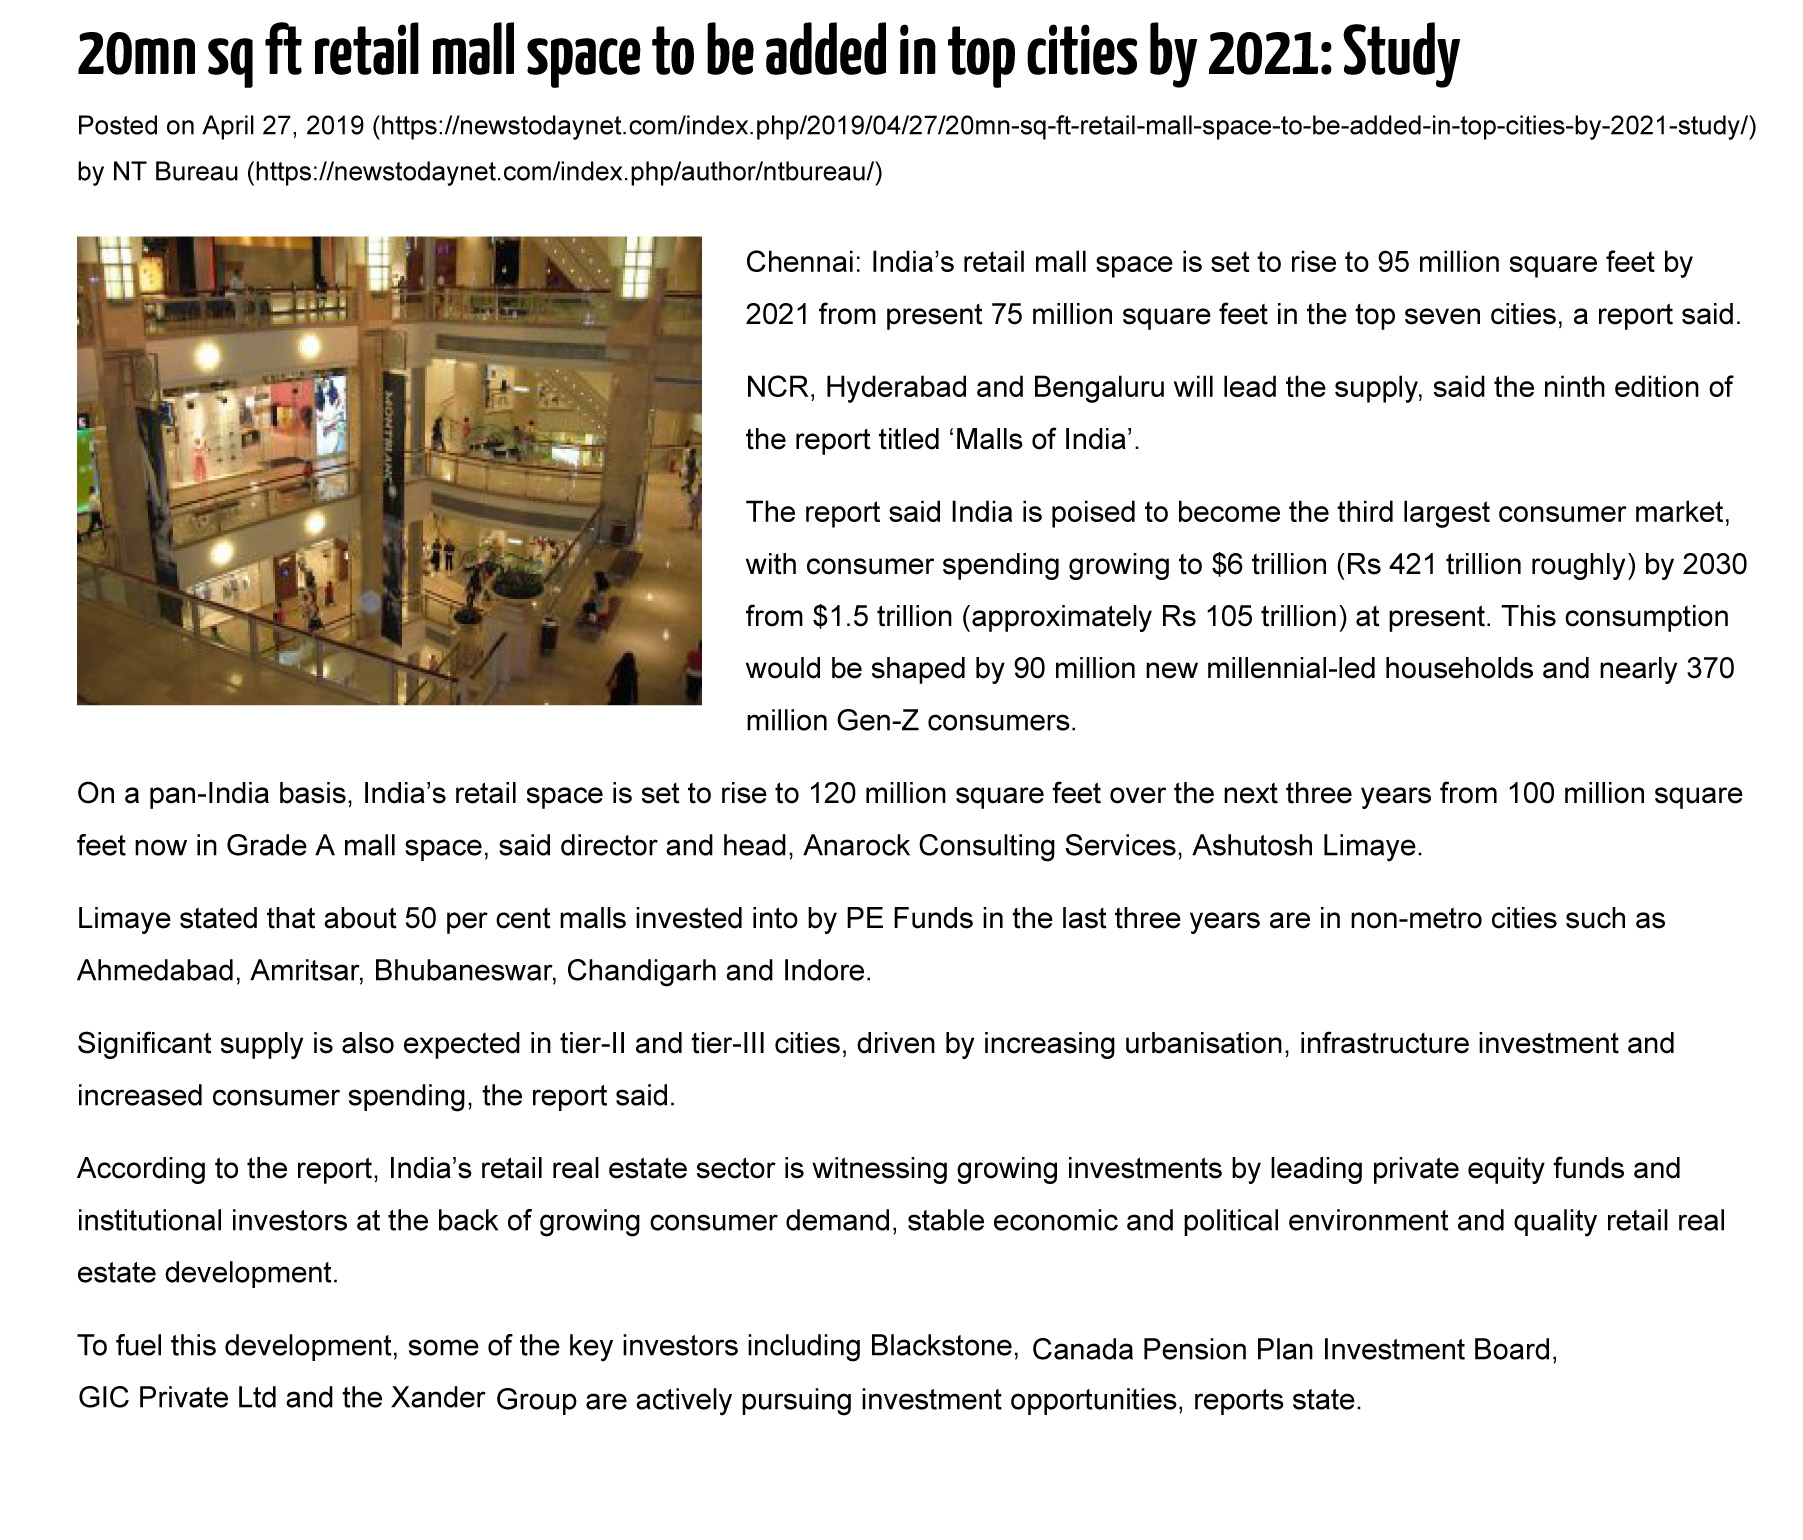 20mn sq ft retail mall space to be added in top cities by 2021